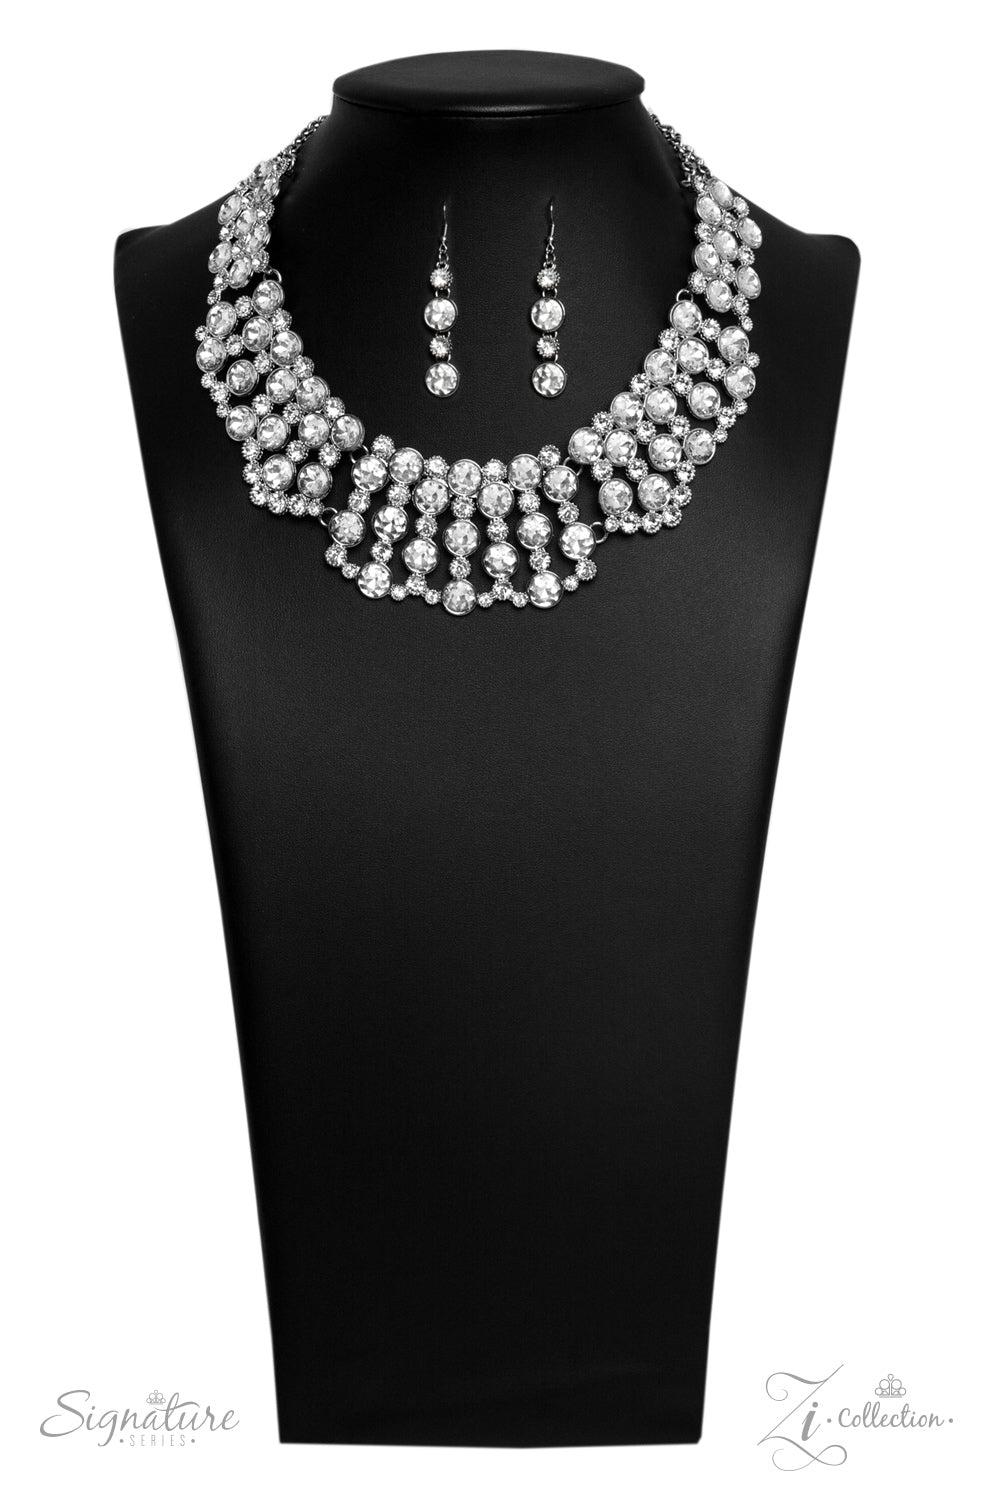 THE HEATHER - WHITE CLEAR RHINESTONES COLLAR SCALLOPED 2019 ZI NECKLACE